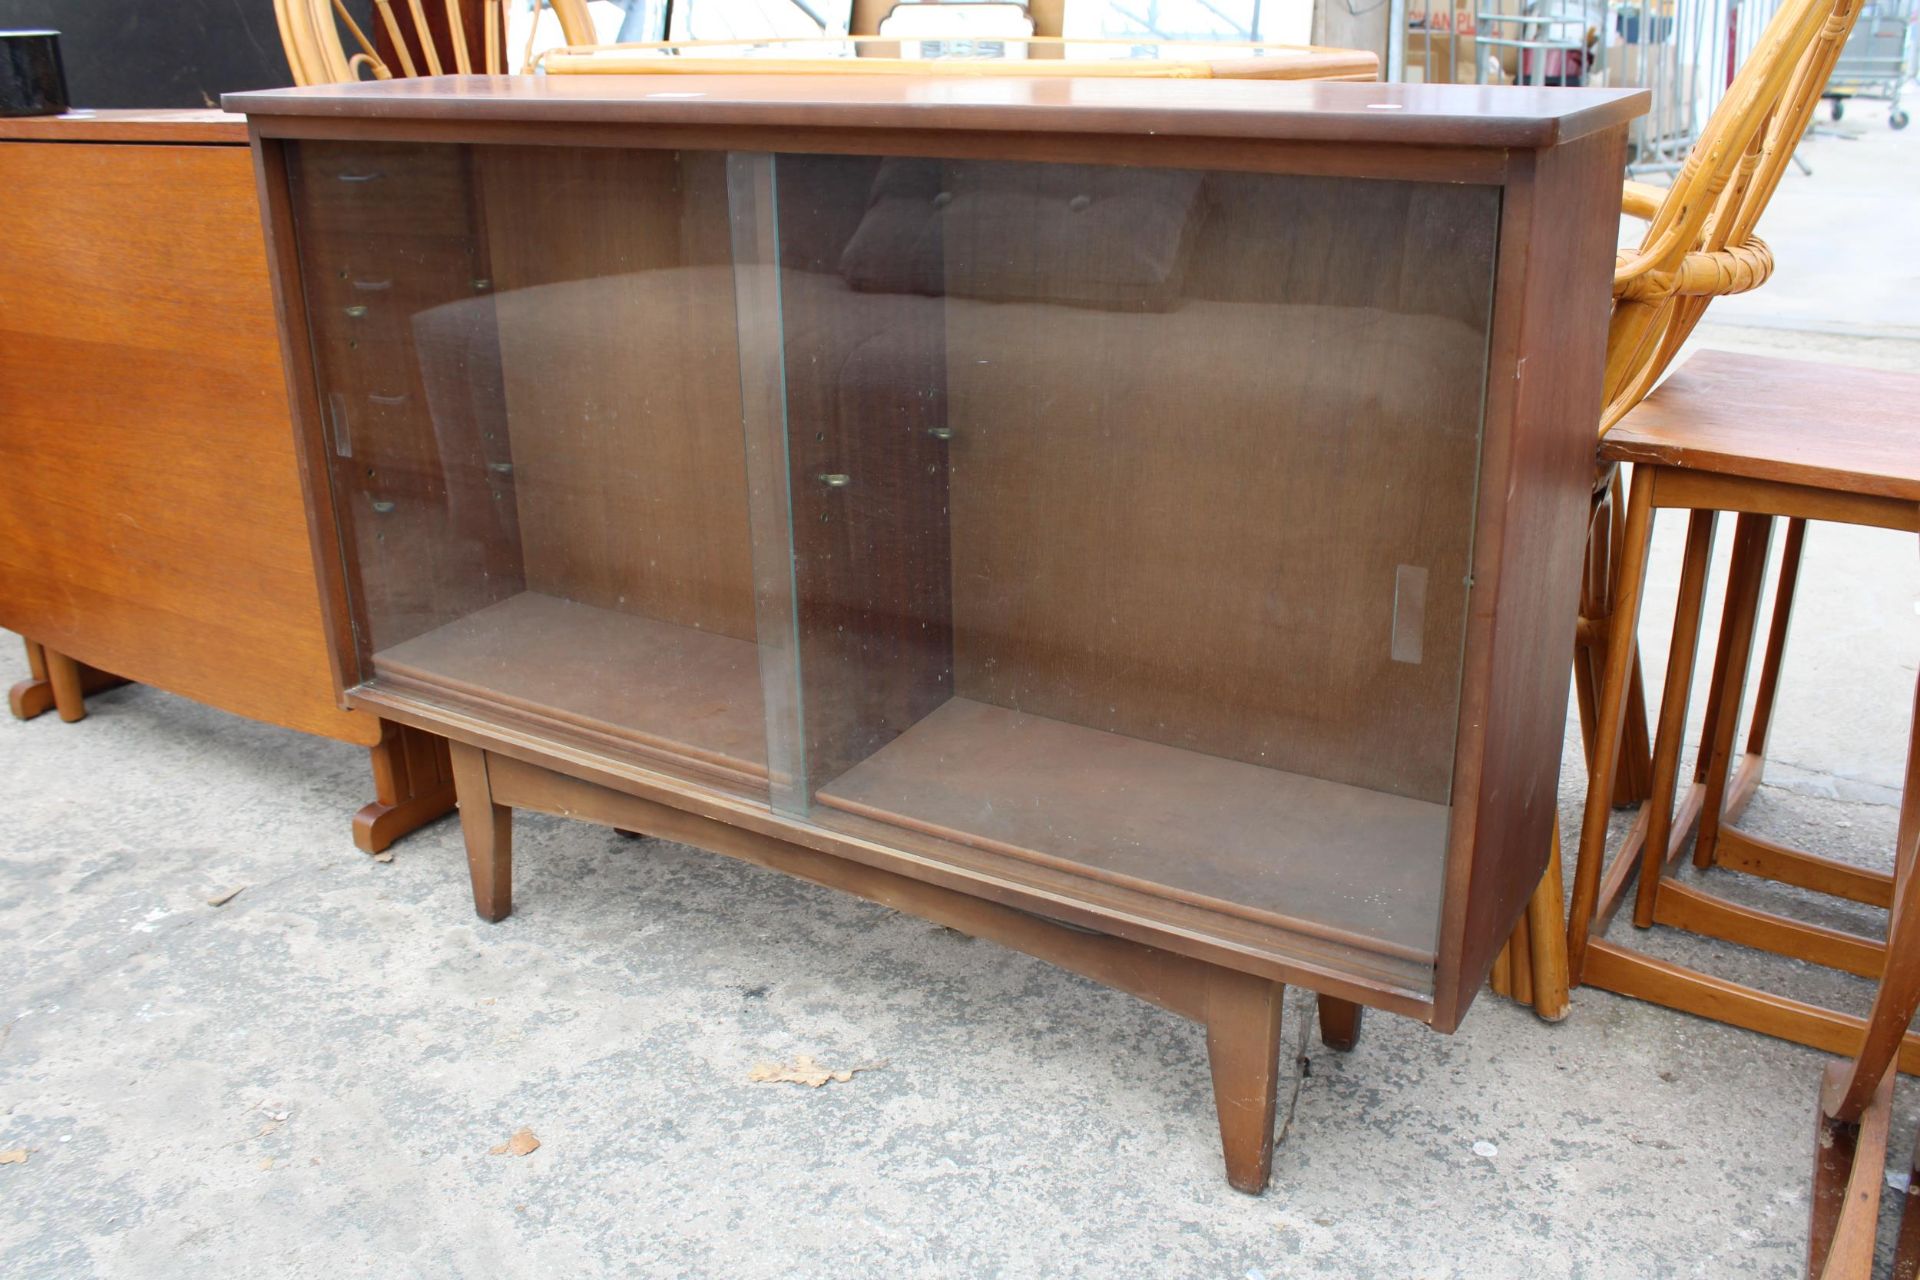 A RETRO TEAK BOOKCASE WITH TWO SLIDING GLASS DOORS 43" WIDE - Image 2 of 2